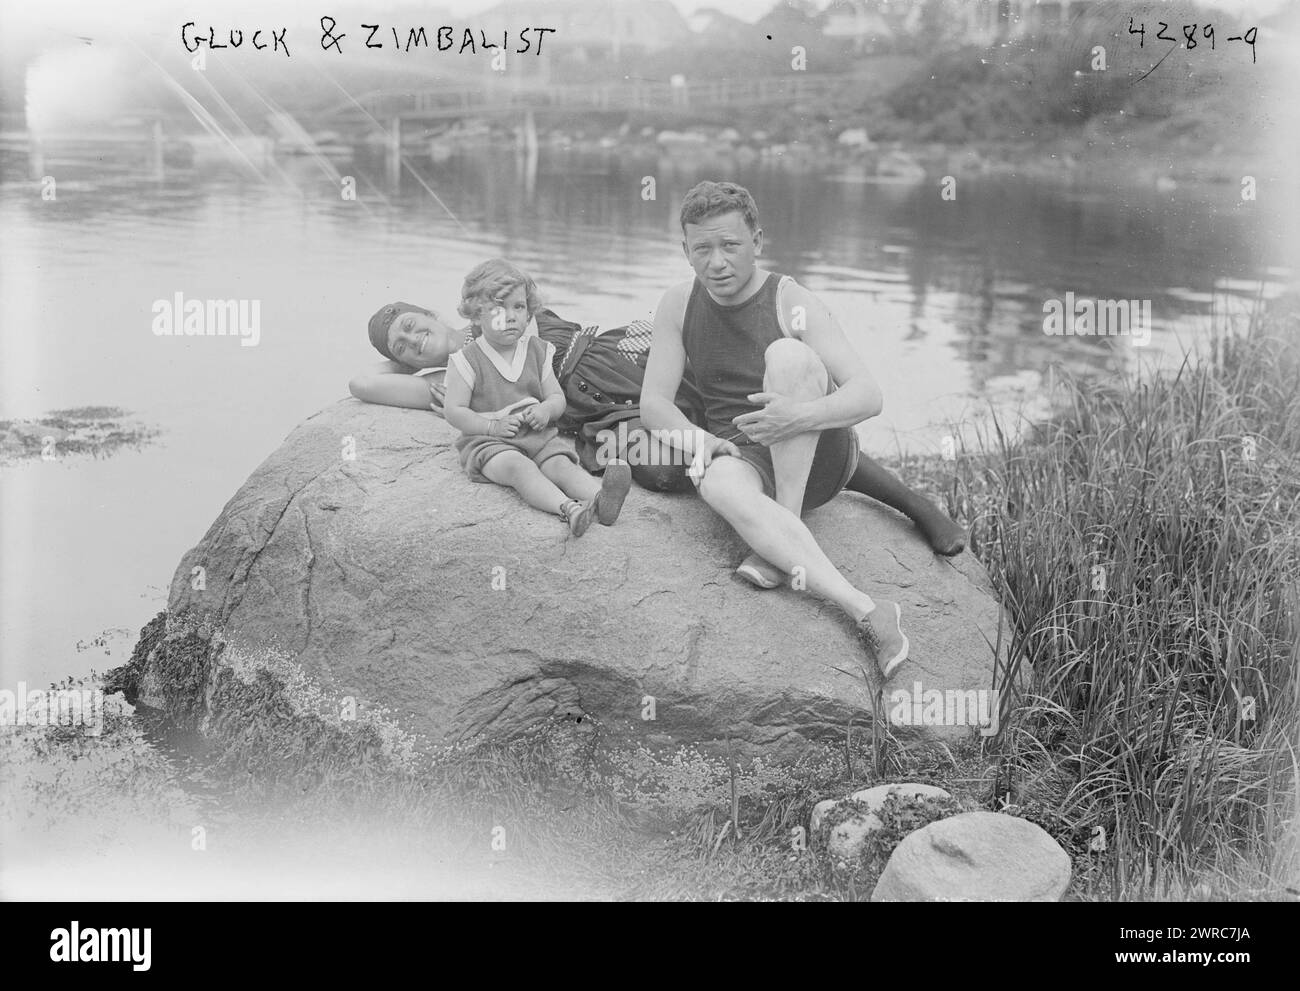 Gluck & Zimbalist, Photograph shows Romanian-born American soprano opera singer Alma Gluck (1884-1939) with her husband, Efrem Zimbalist, Sr. and their daughter Maria, vacationing possibly on Fishers Island, New York, August, 1917. Zimbalist was an internationally known concert violinist, composer, teacher, conductor, and director of the Curtis Institute of Music., 1917 August, Glass negatives, 1 negative: glass Stock Photo